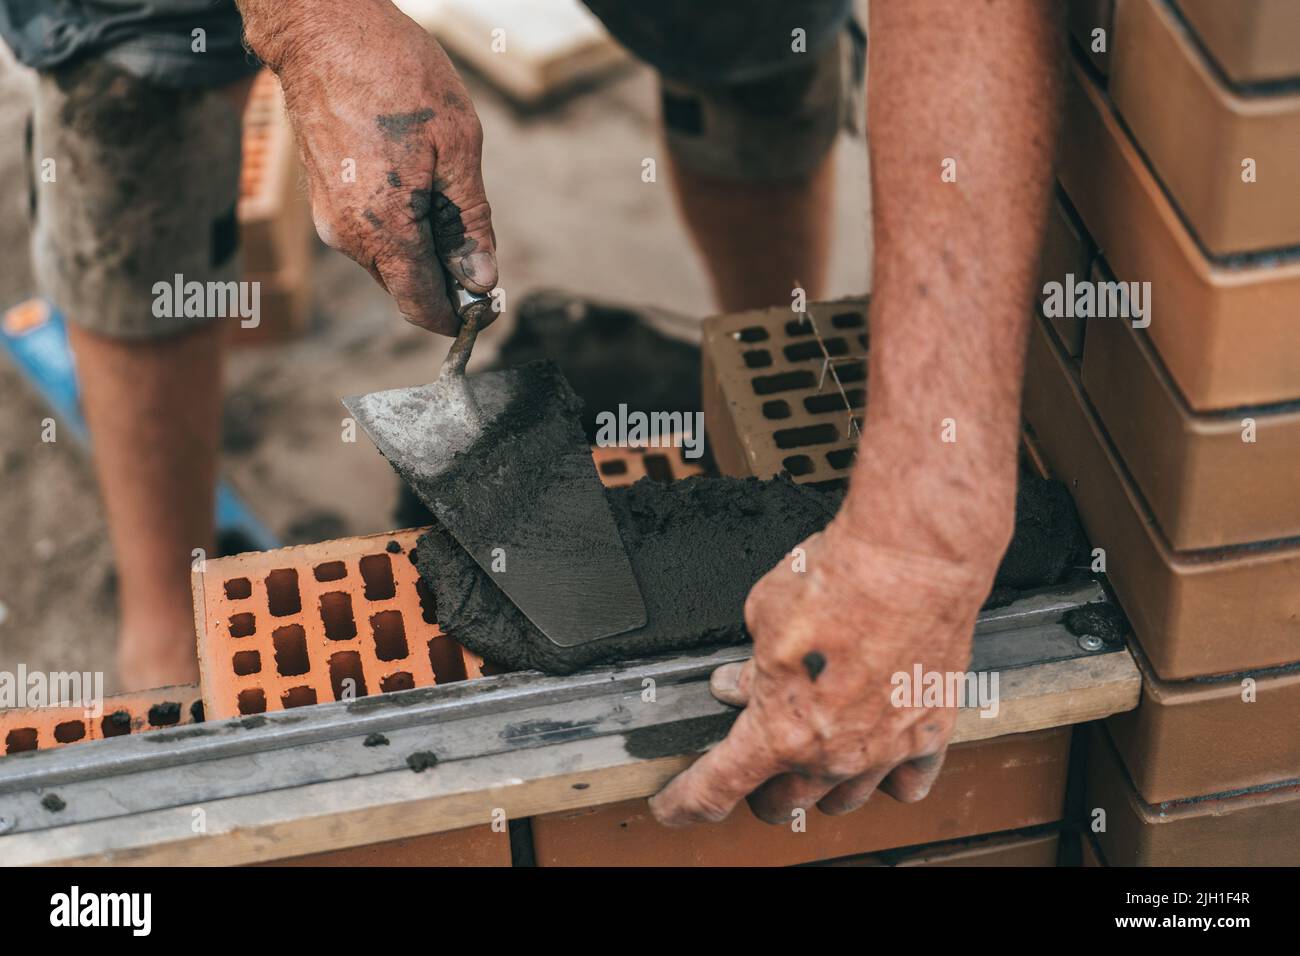 Worker or bricklayer works with trowel laying bricks. Builder makes brickwork on construction site, close up on hands. Stock Photo